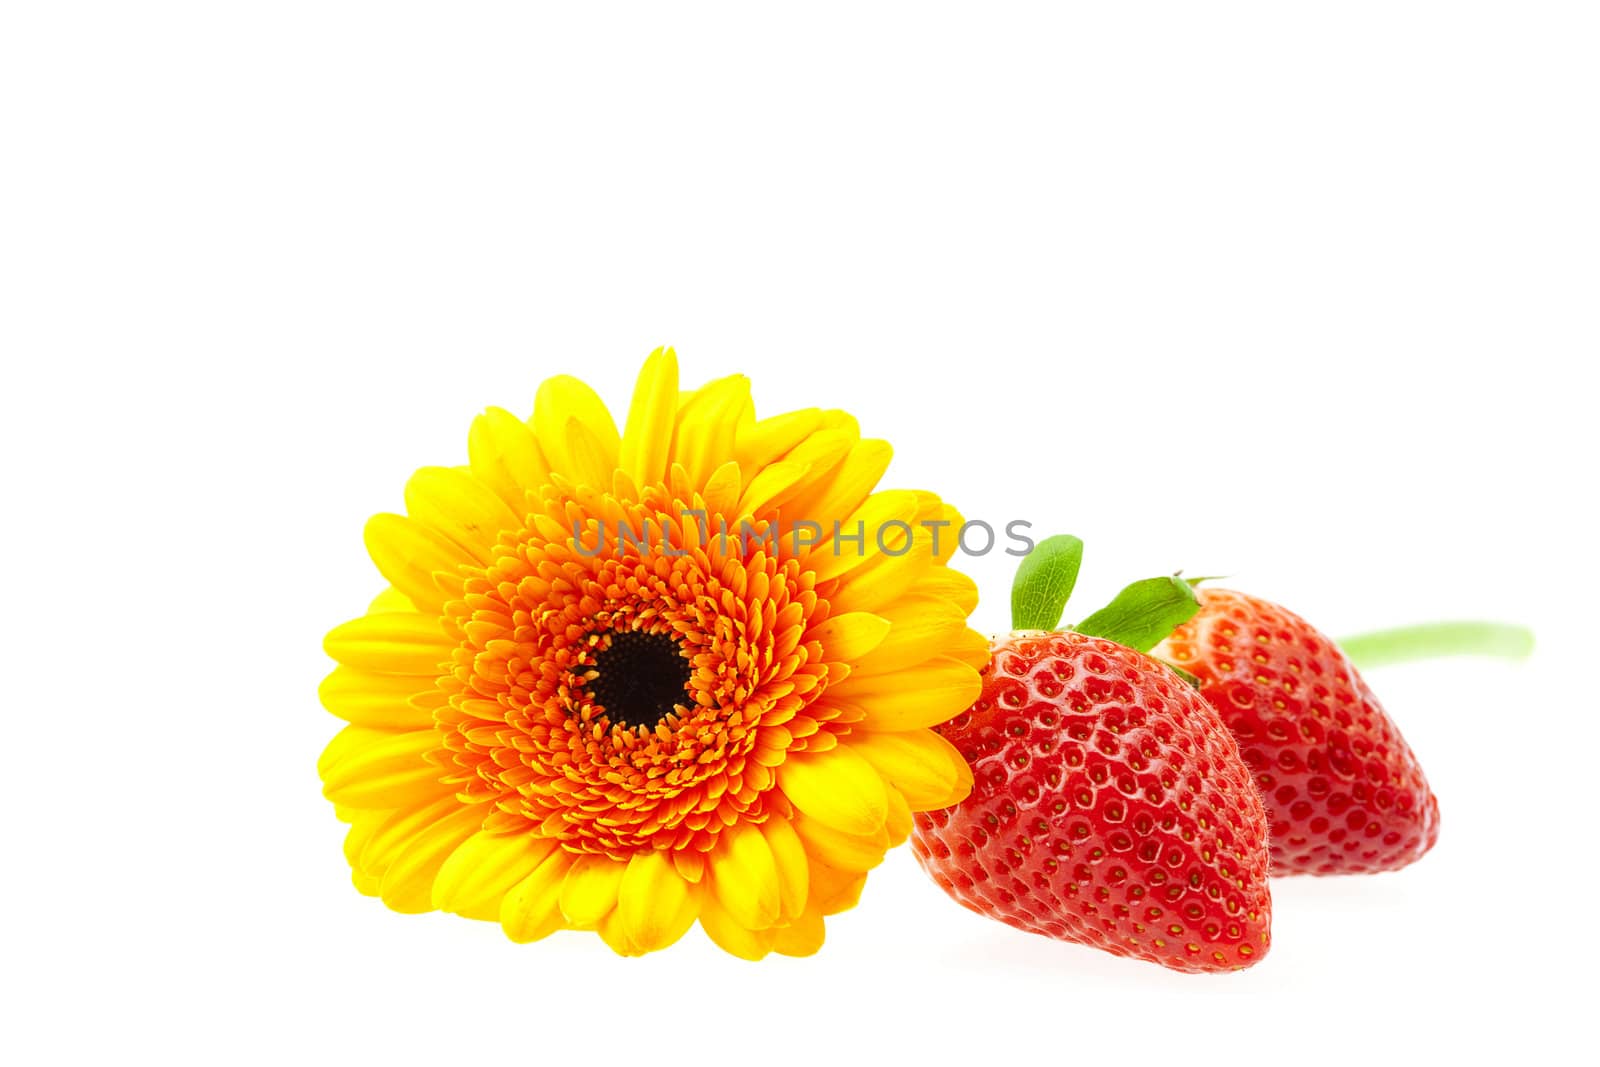 flower and strawberry isolated on white